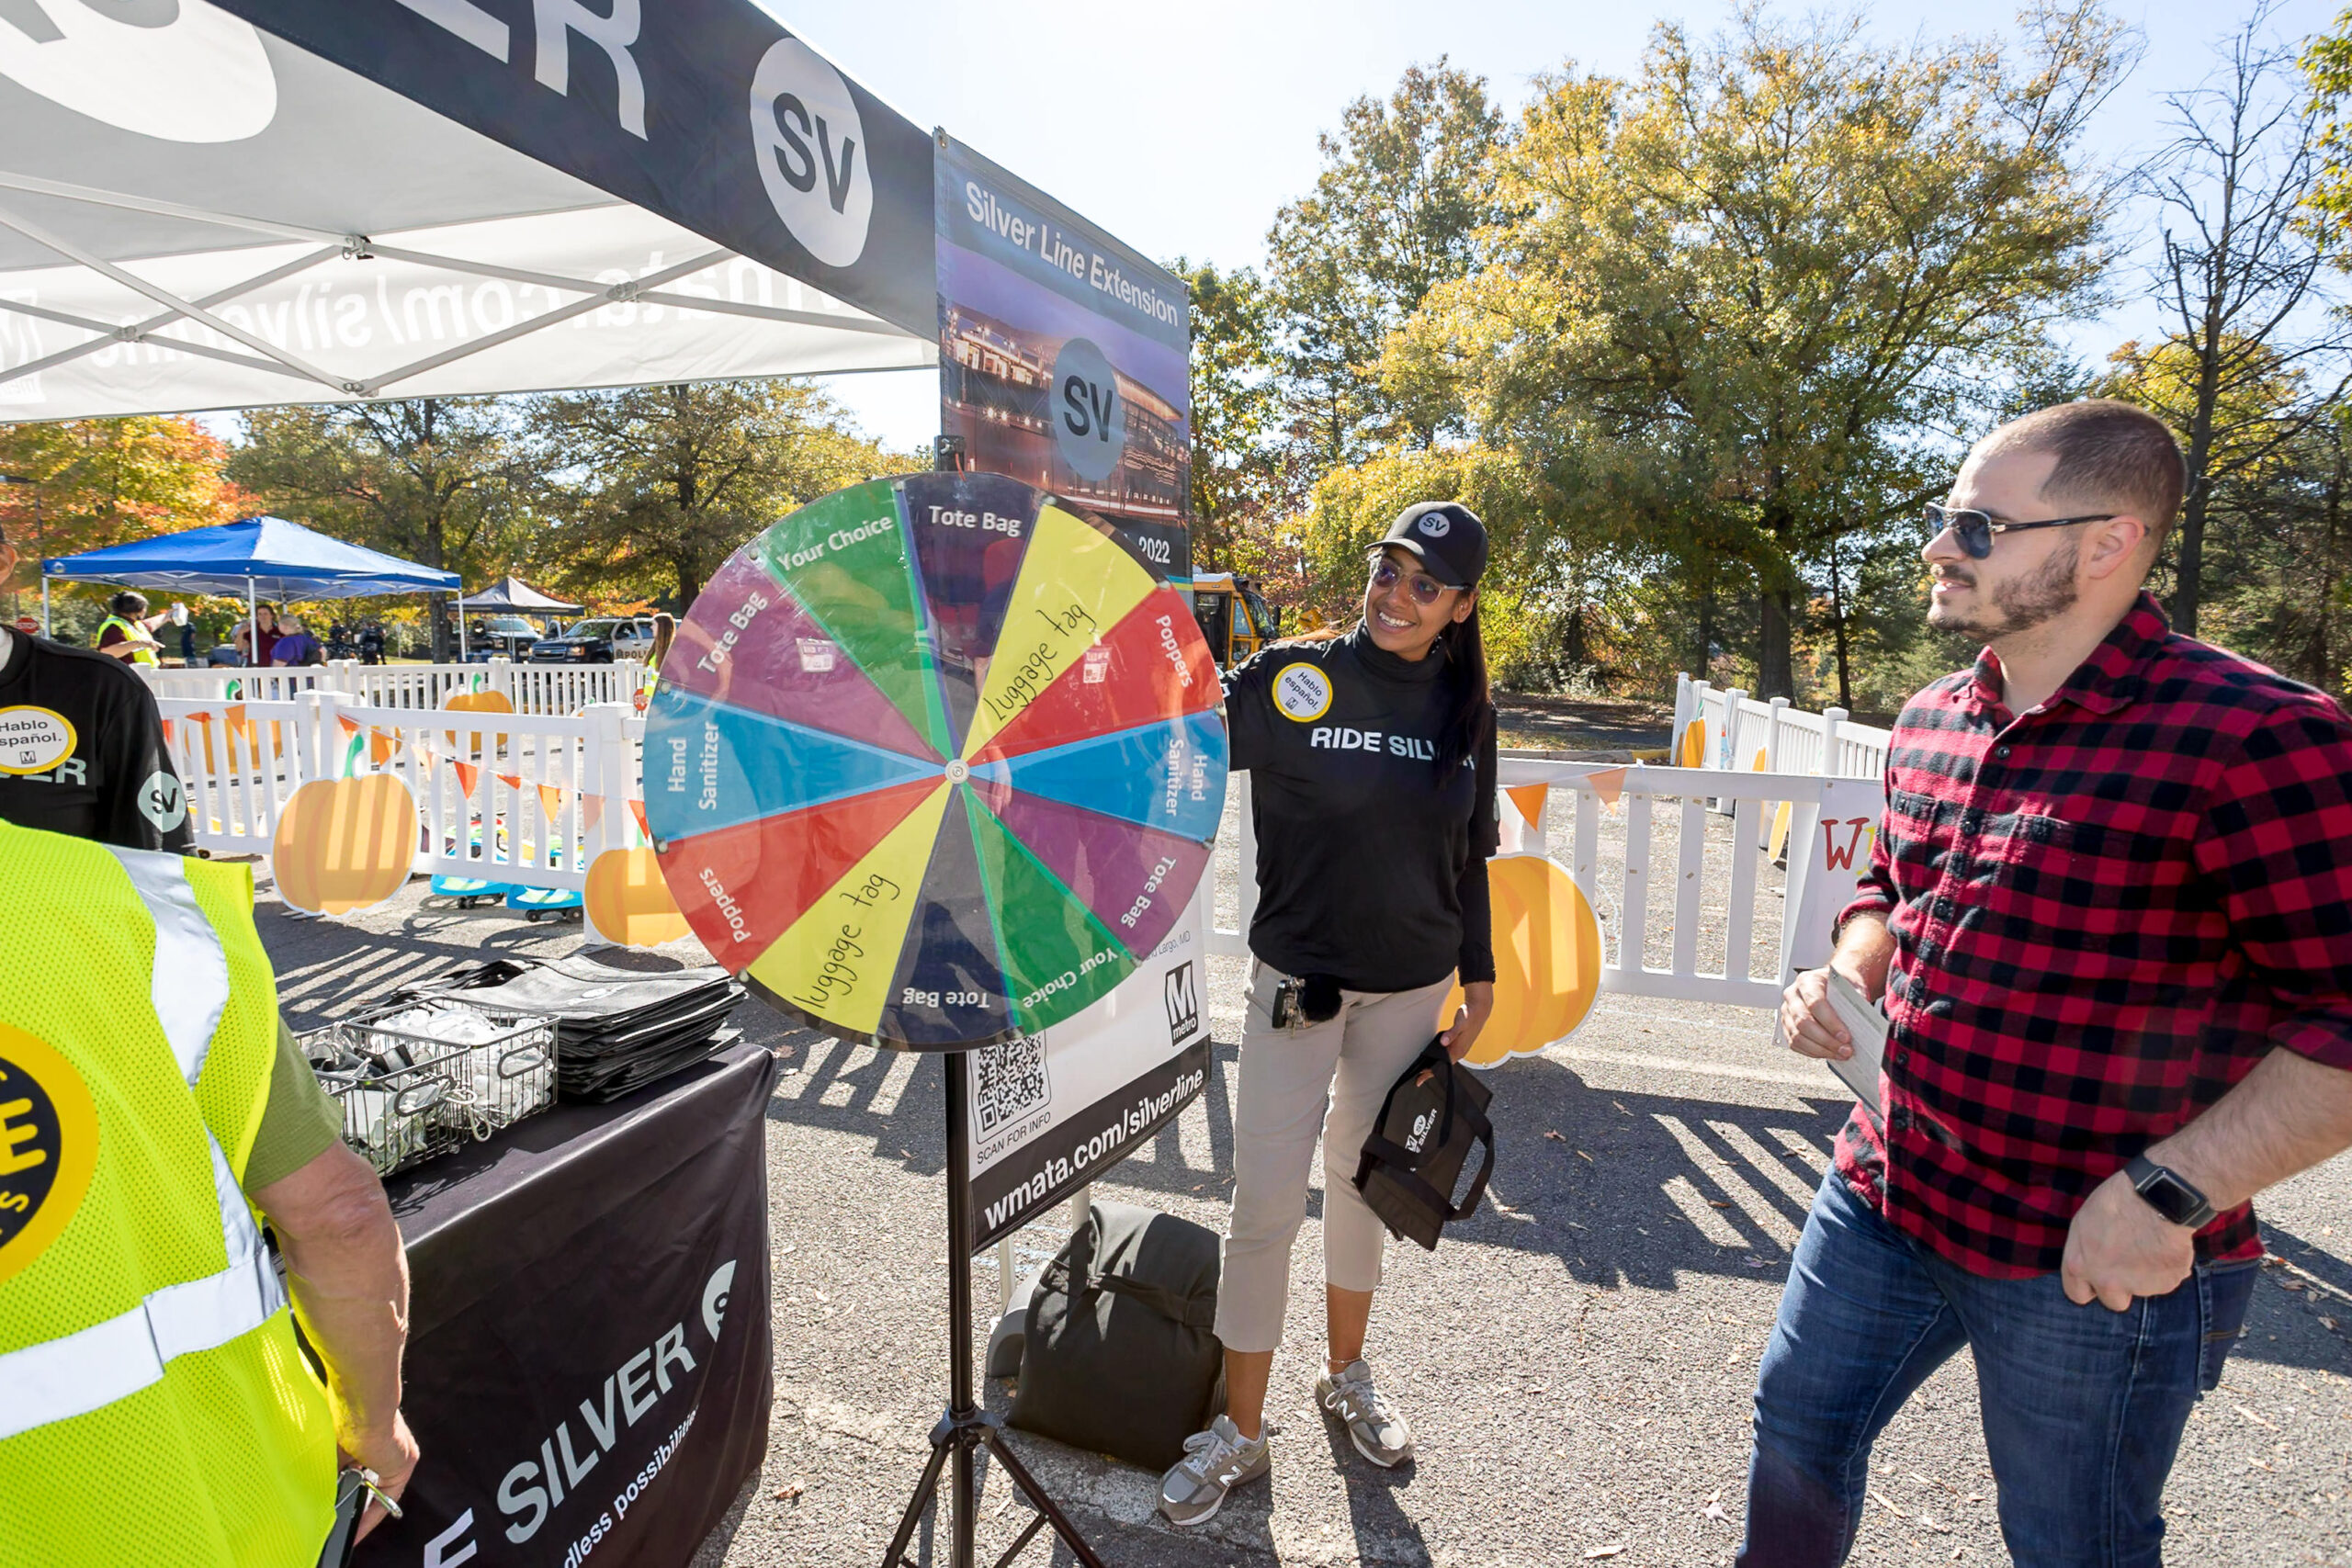 picture of a man spinning the prize wheel at the metro exhibitor tent